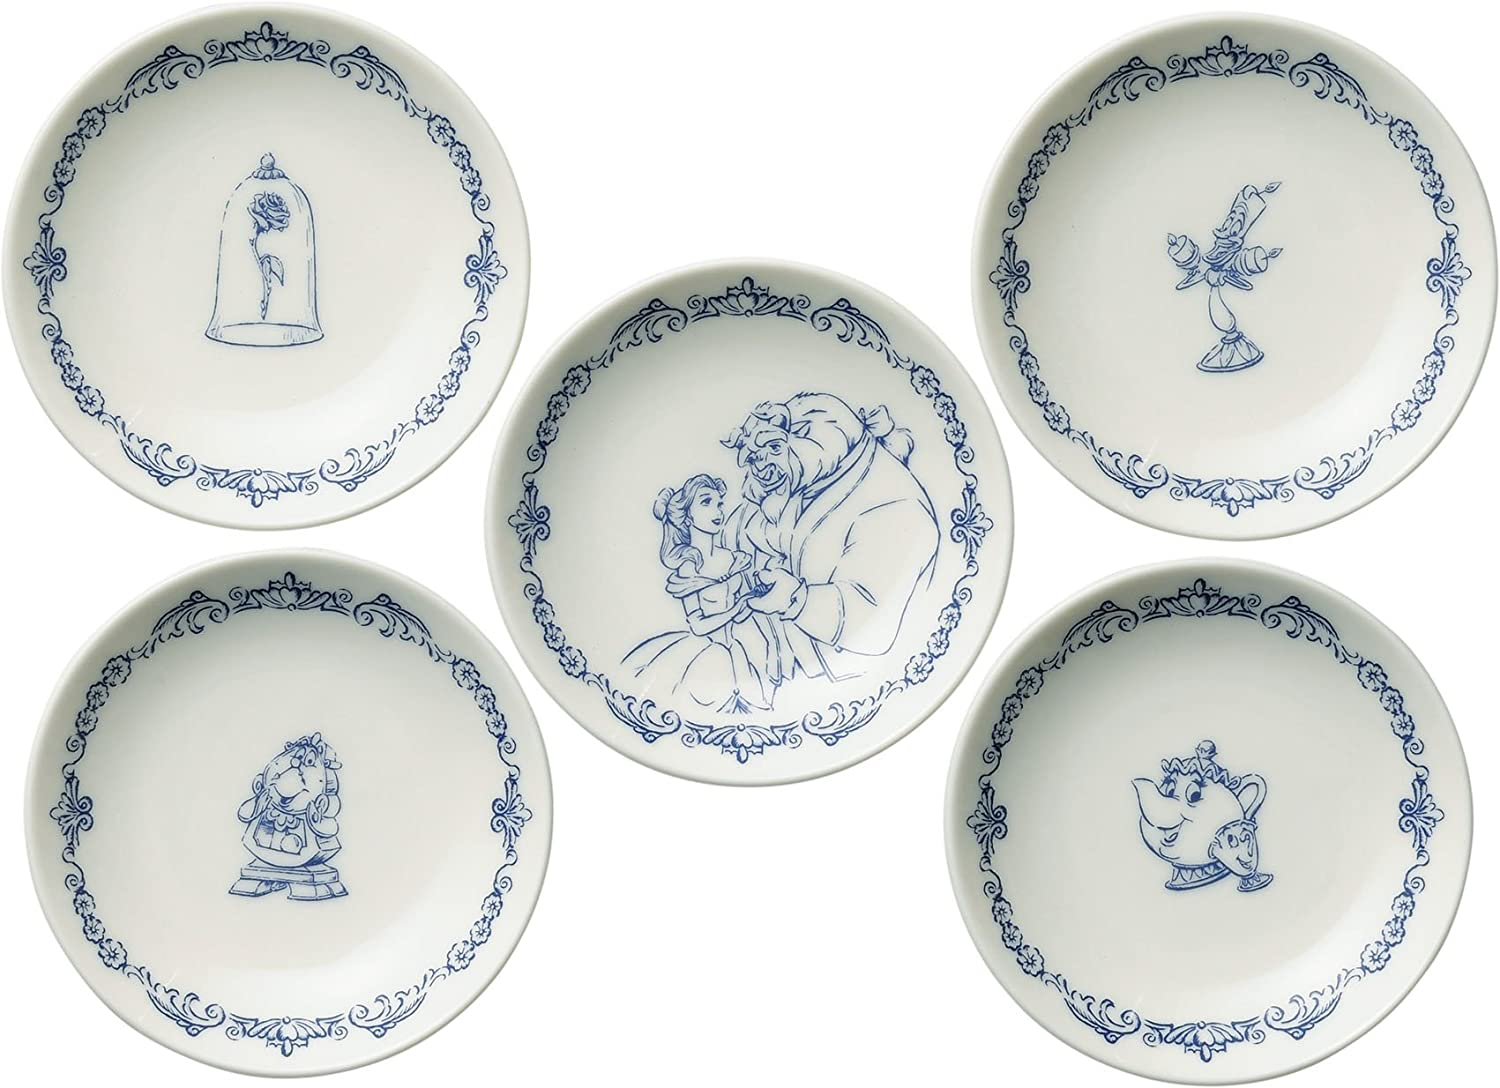 Beauty and The Beast Dish Set